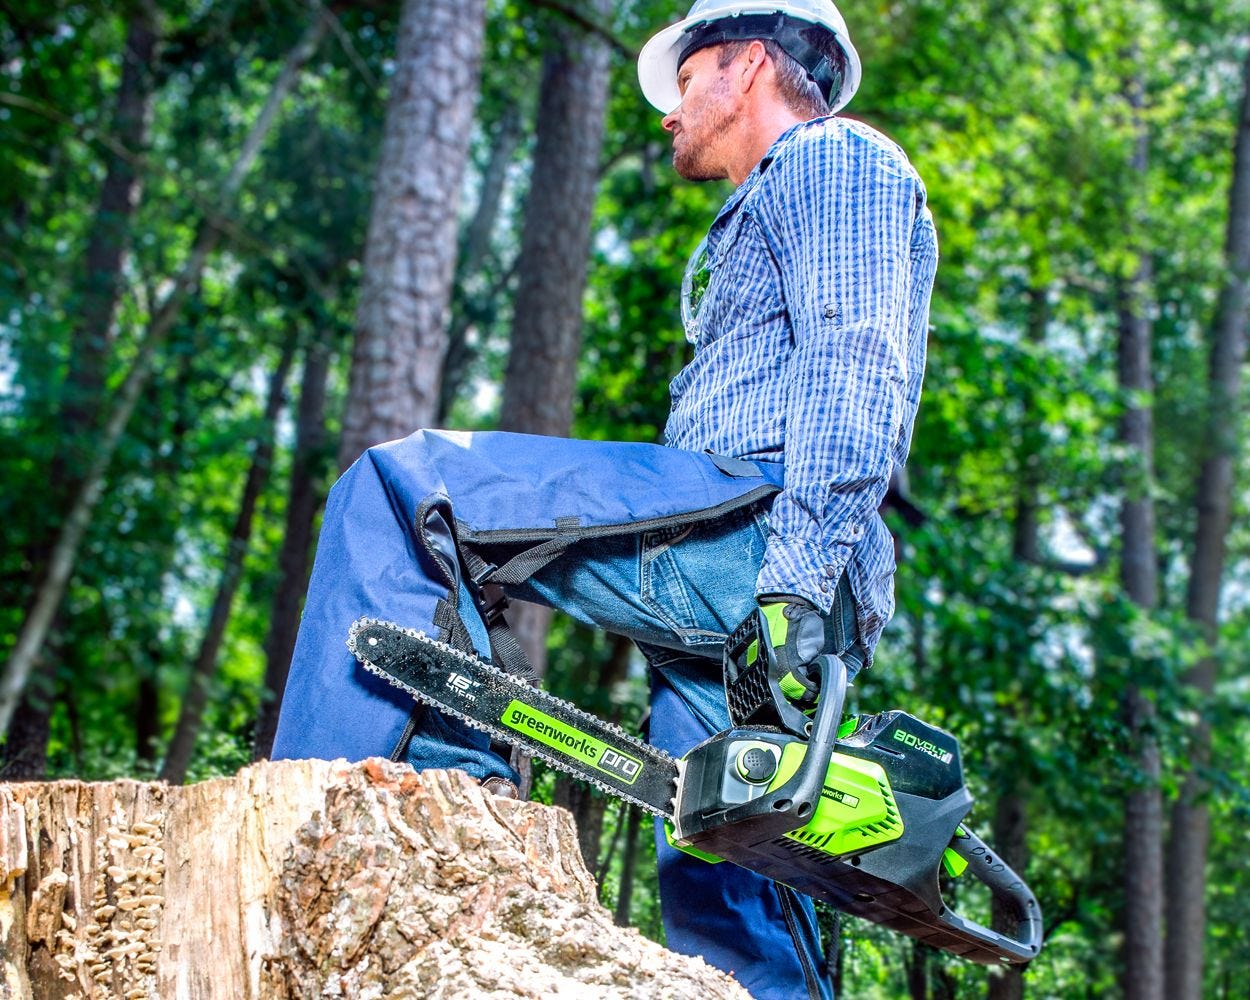 80V 16-inch Brushless Chainsaw (Tool Only) | Greenworks Pro